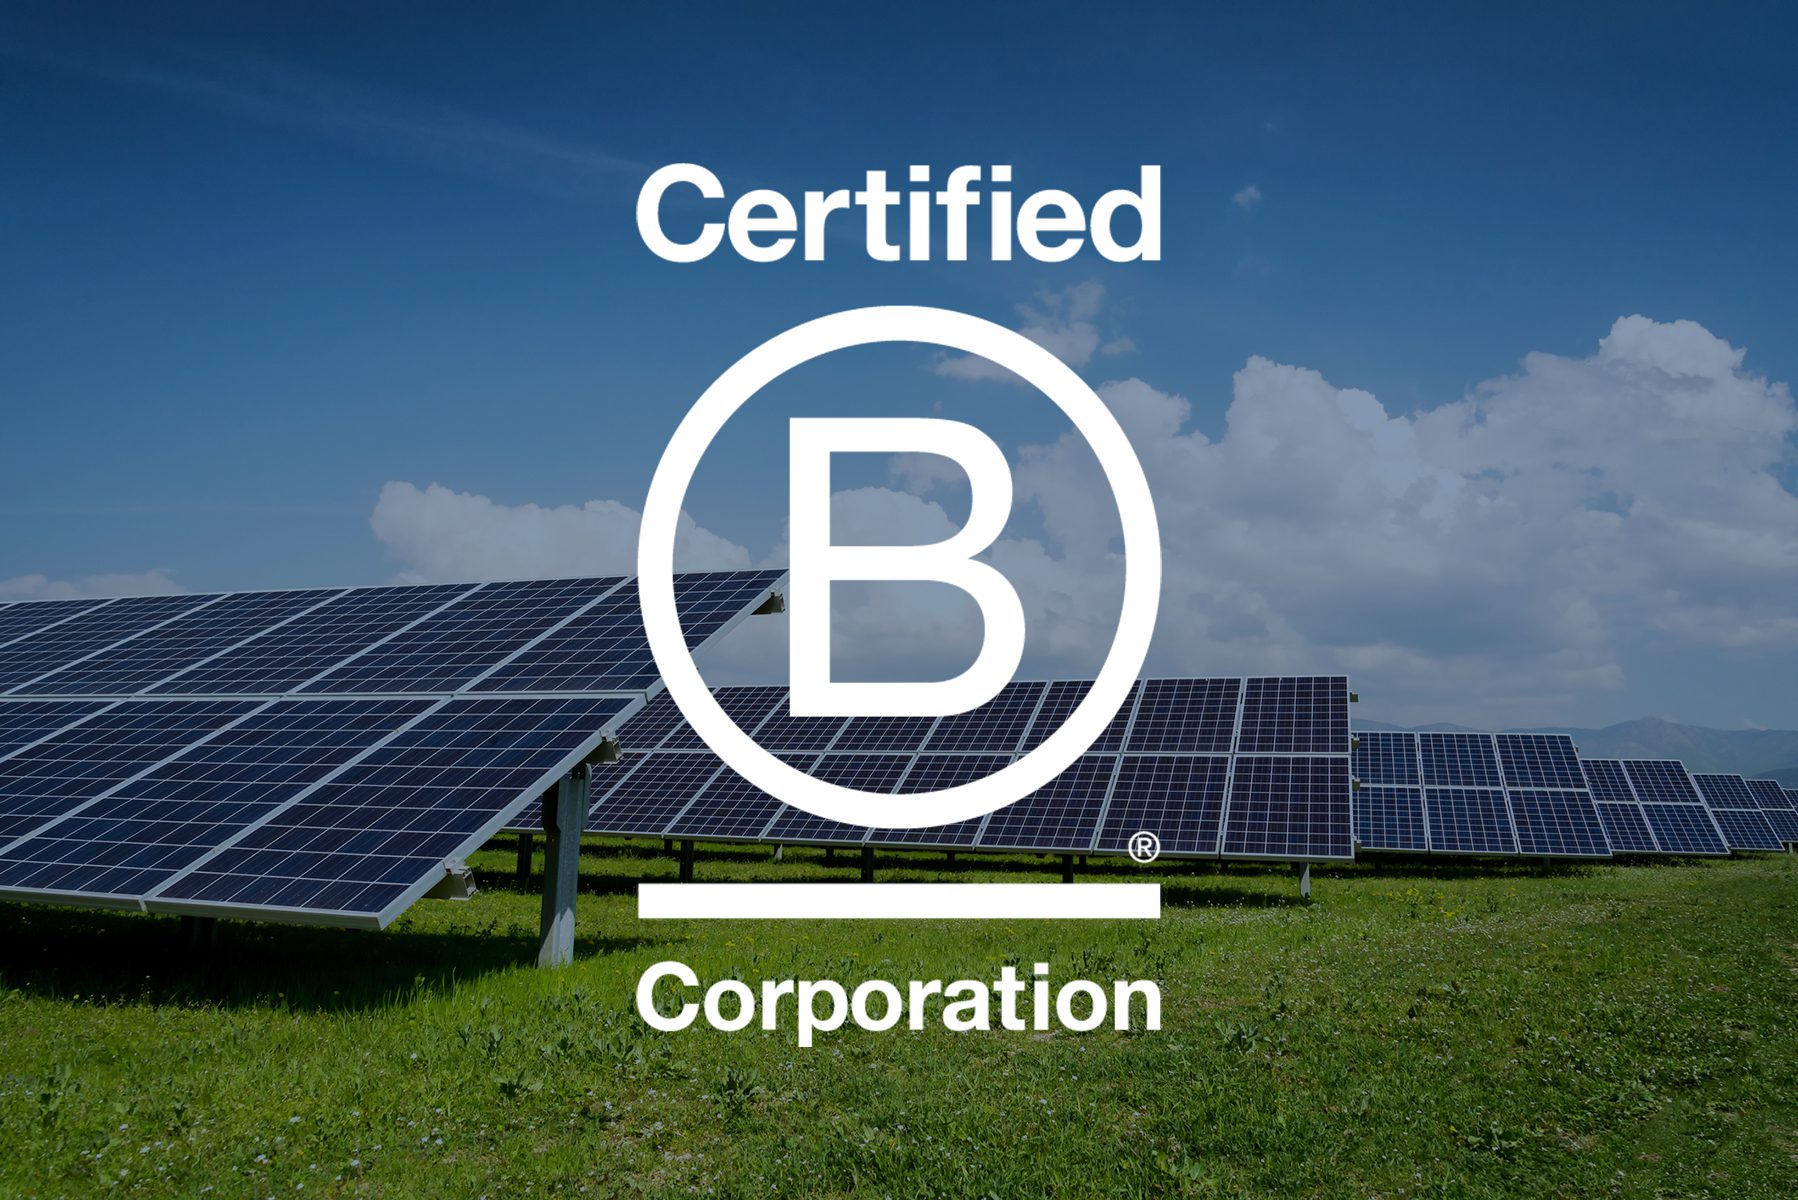 b Corp website GettyImages 1077548368 1